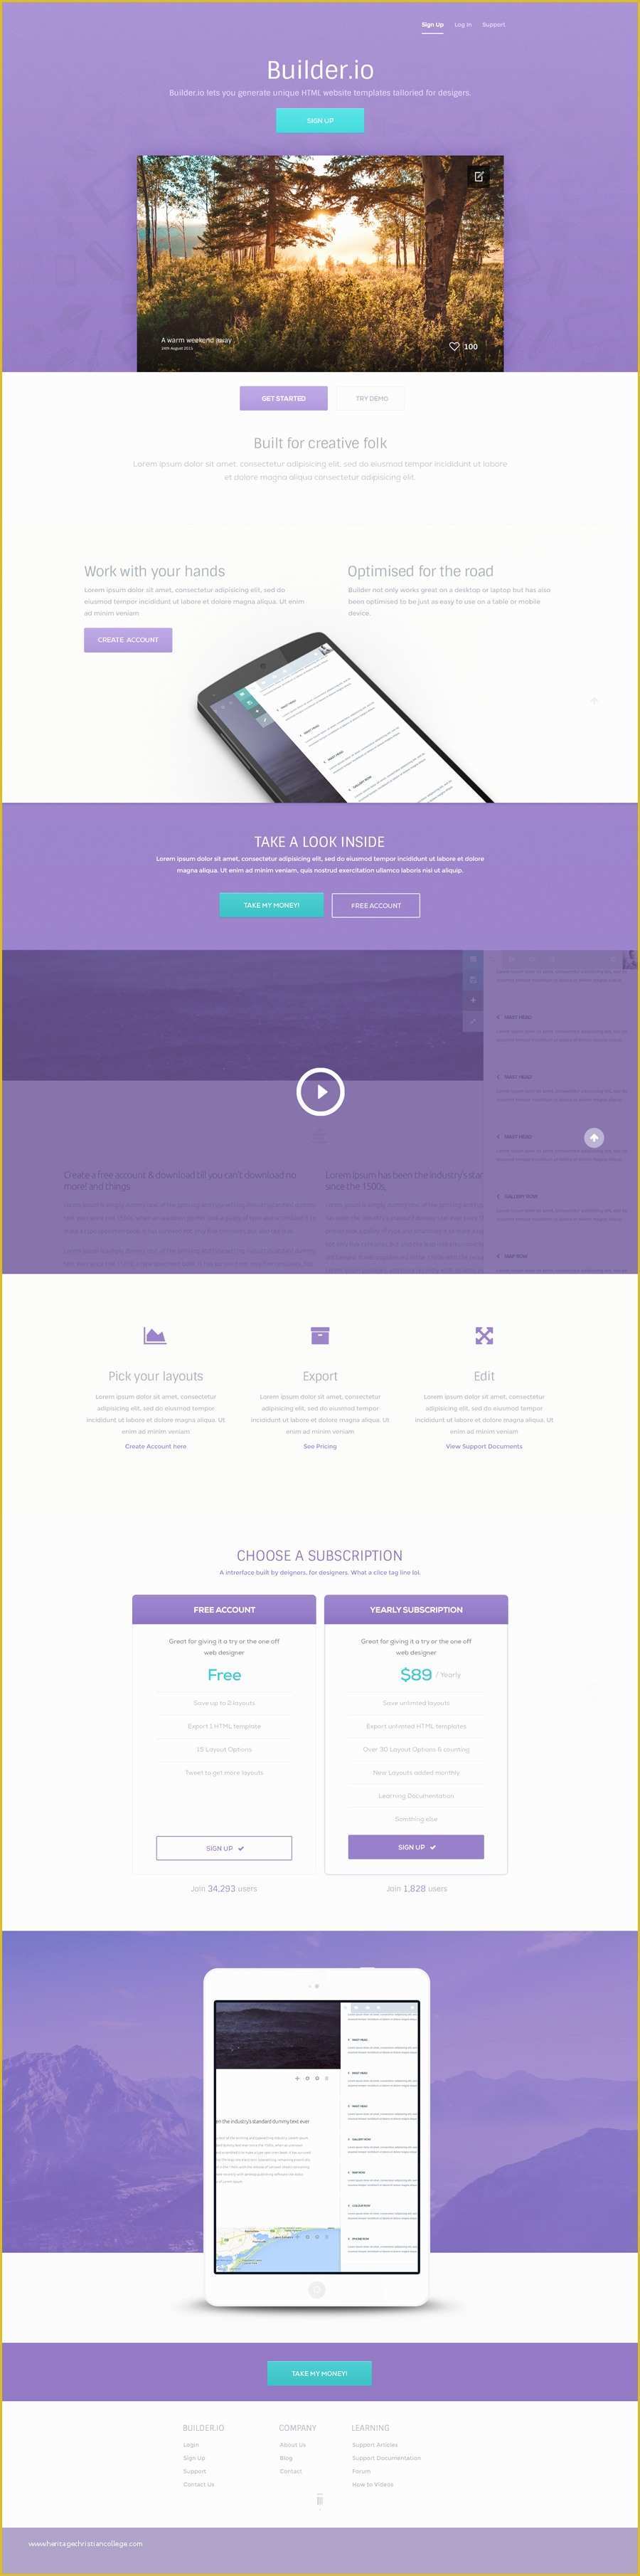 Free Template Builder for Websites Of Builder A Free Vibrant Web App Psd Template